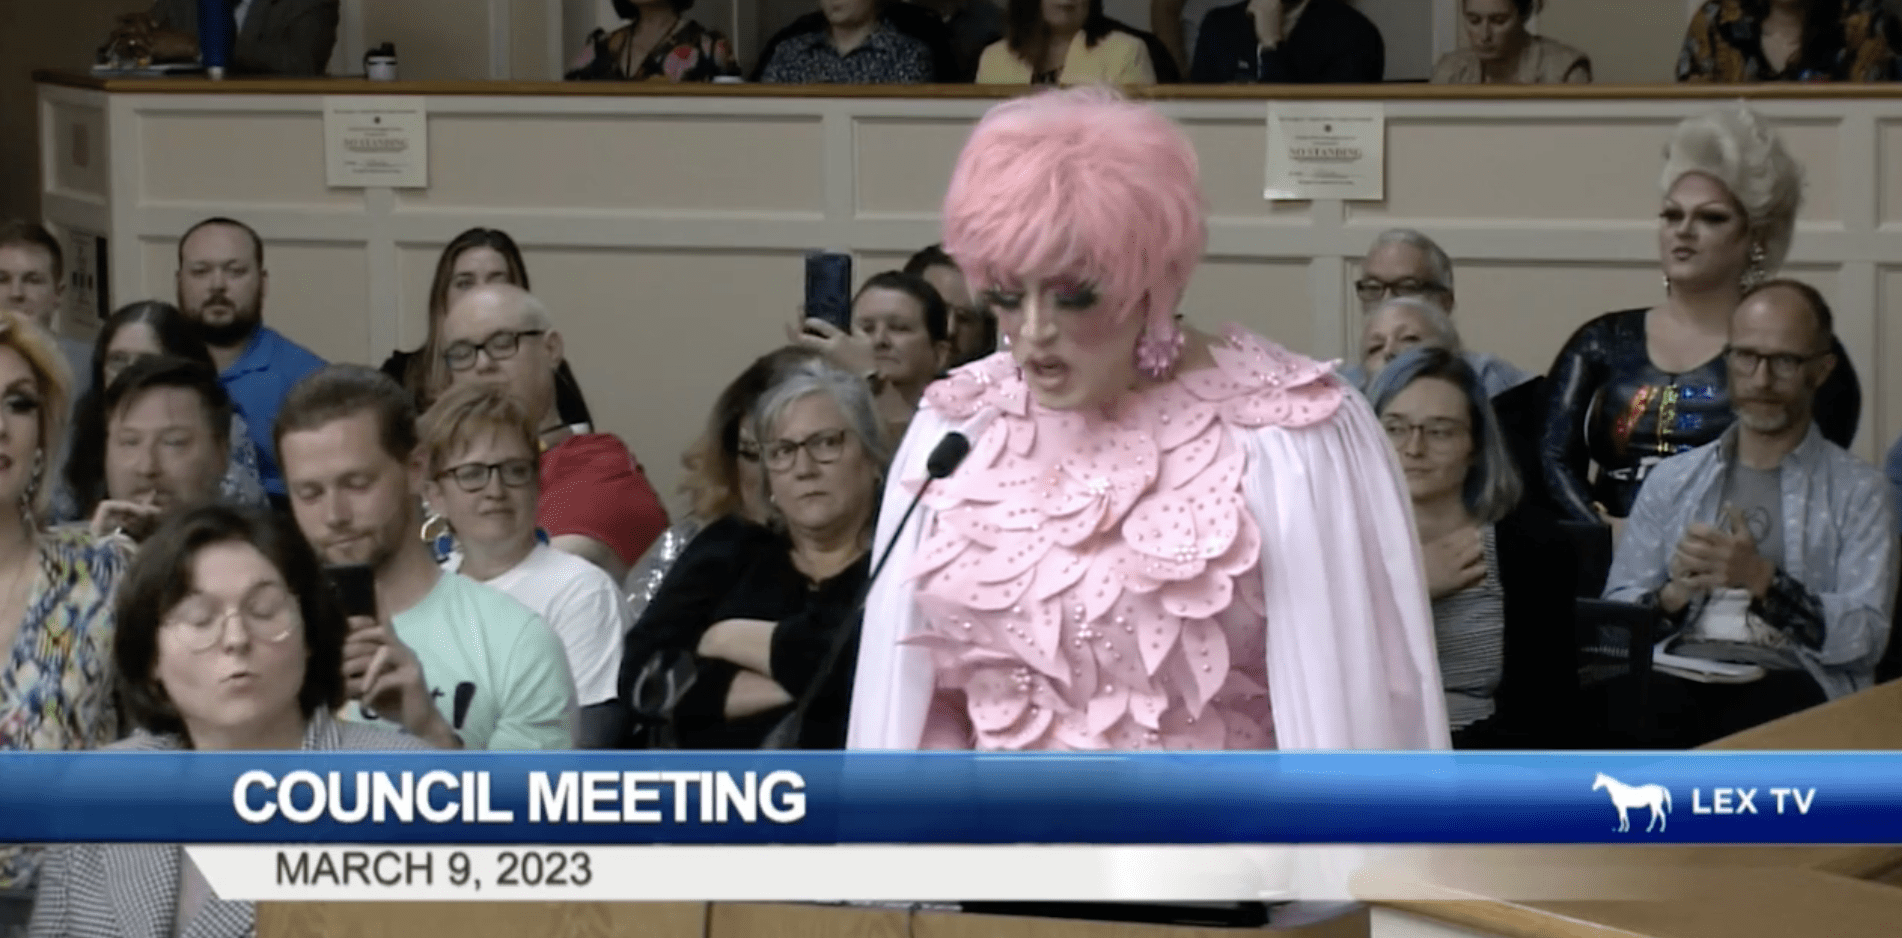 Council Releases Statement in Response to LGBTQ Advocacy Group's Petition